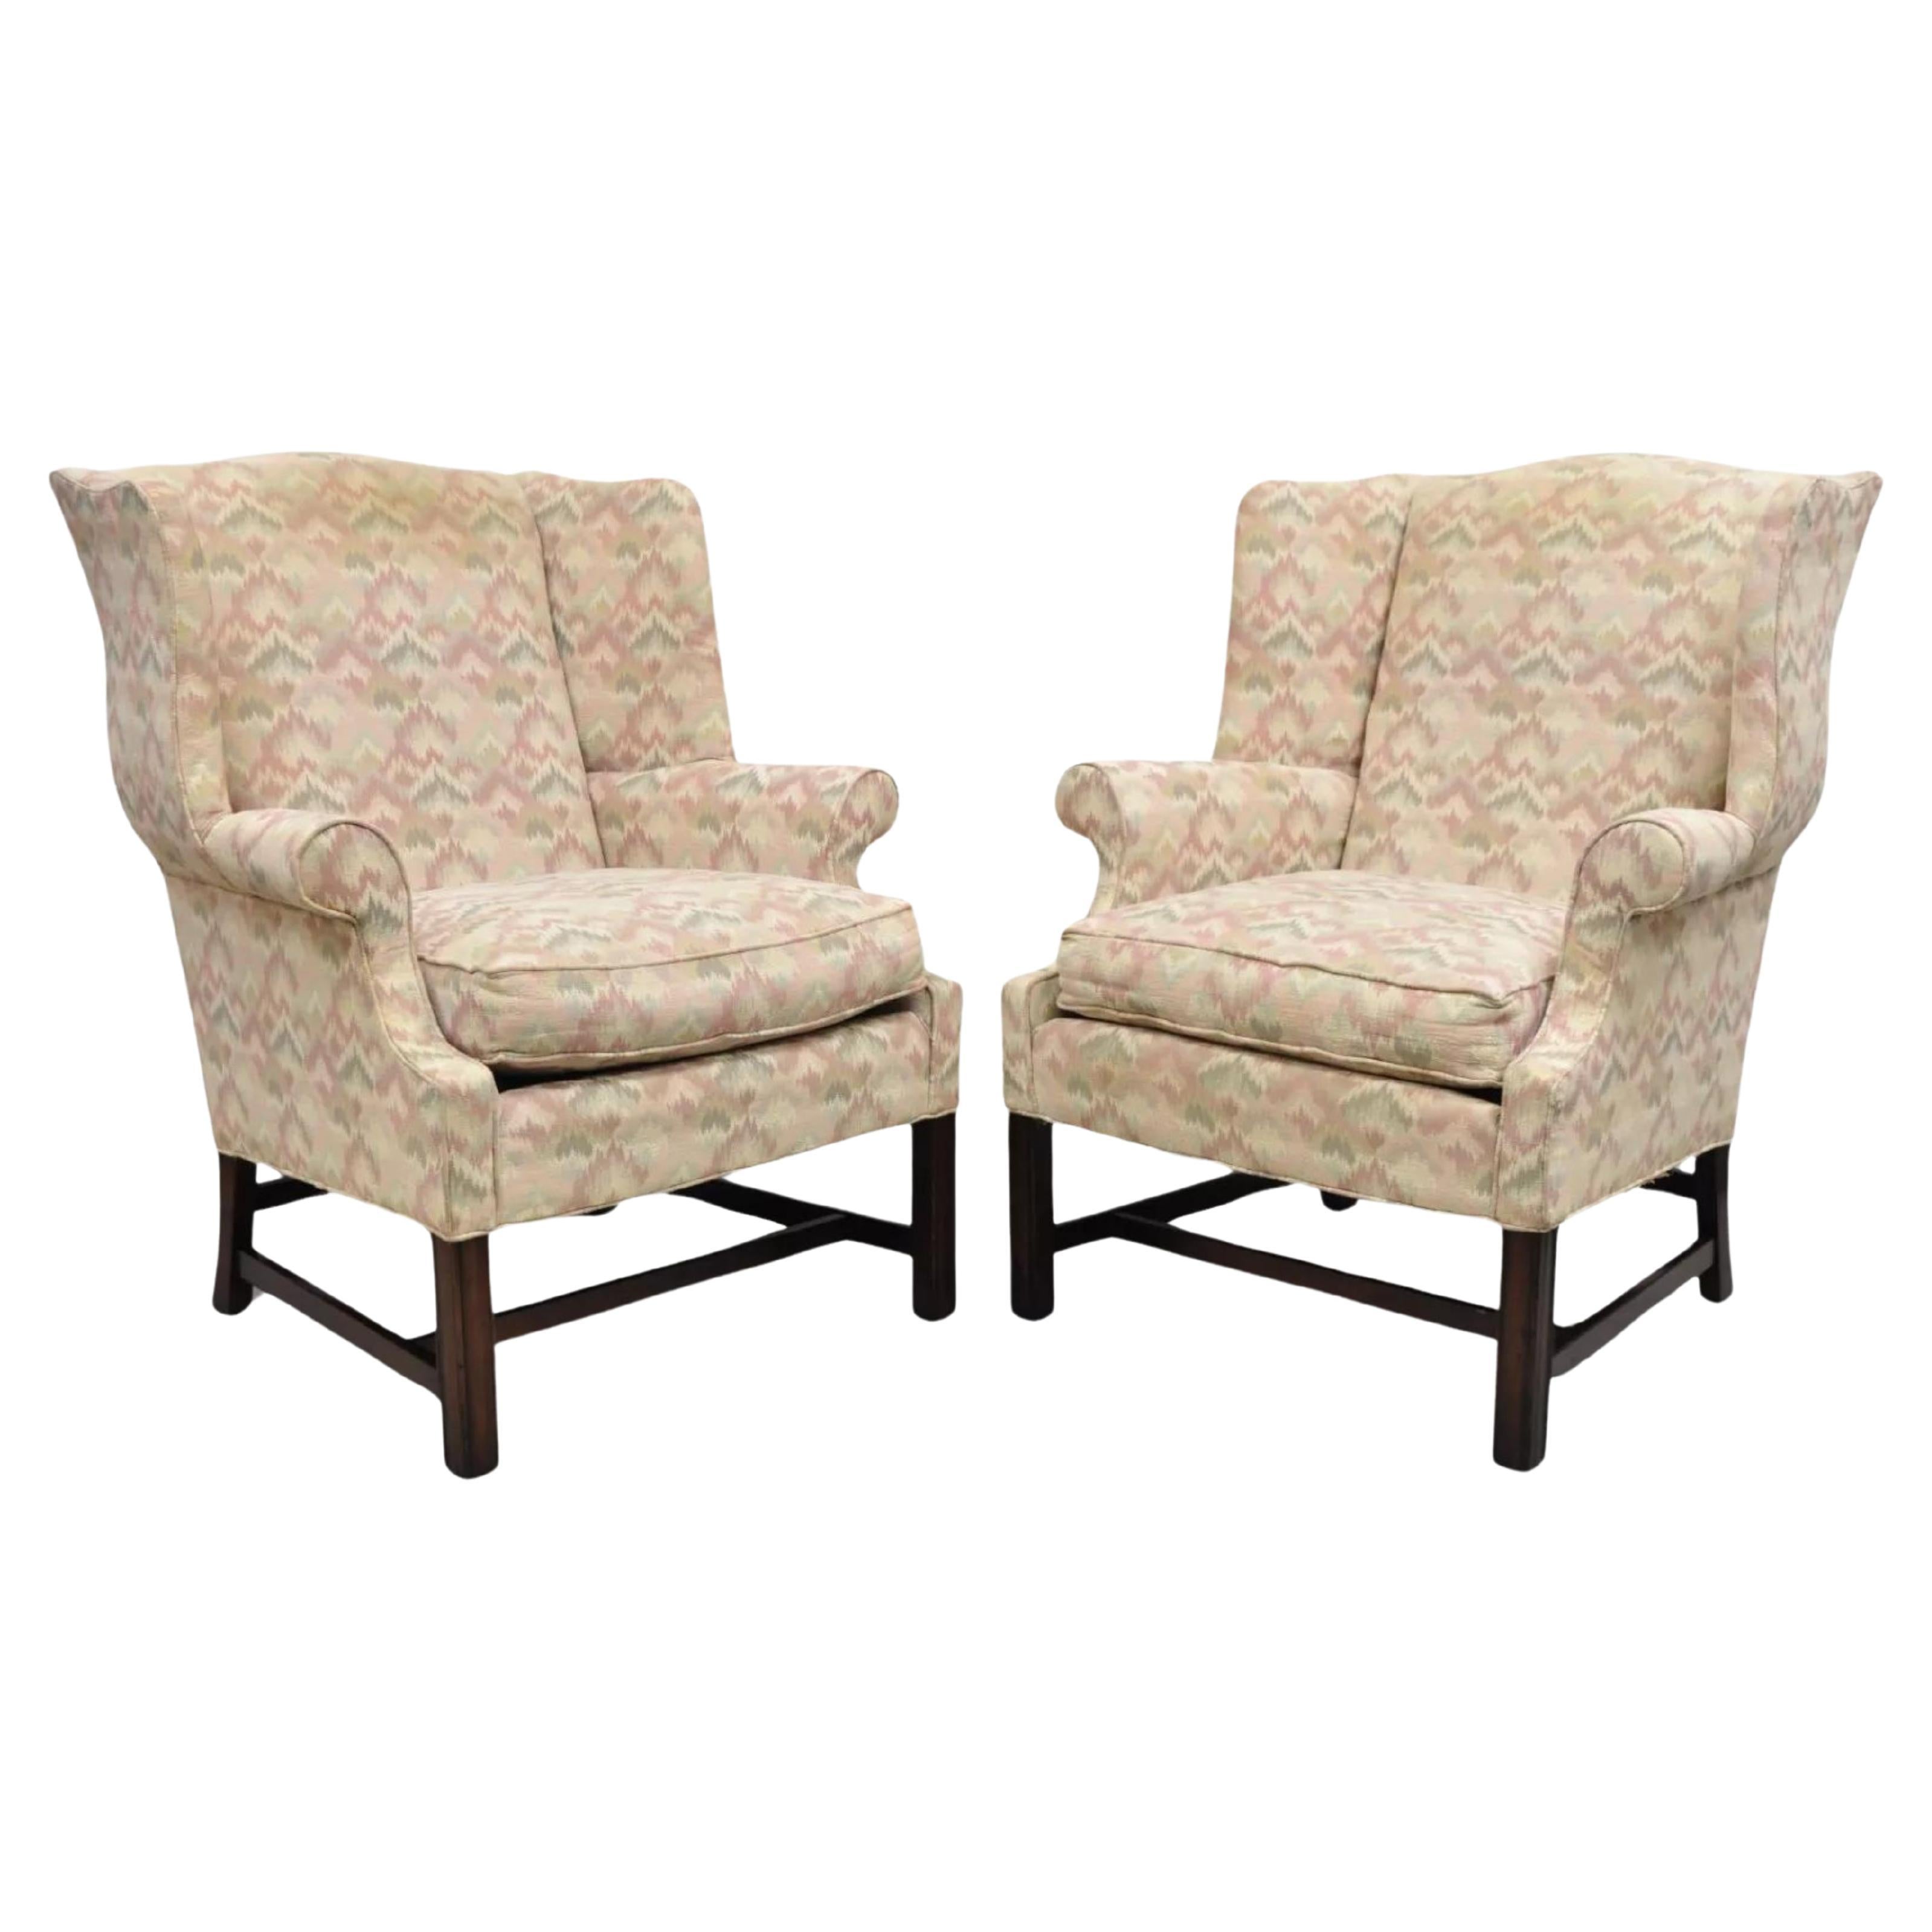 Frederick Edward Georgian Style Upholstered Wingback Lounge Arm Chairs - a Pair For Sale